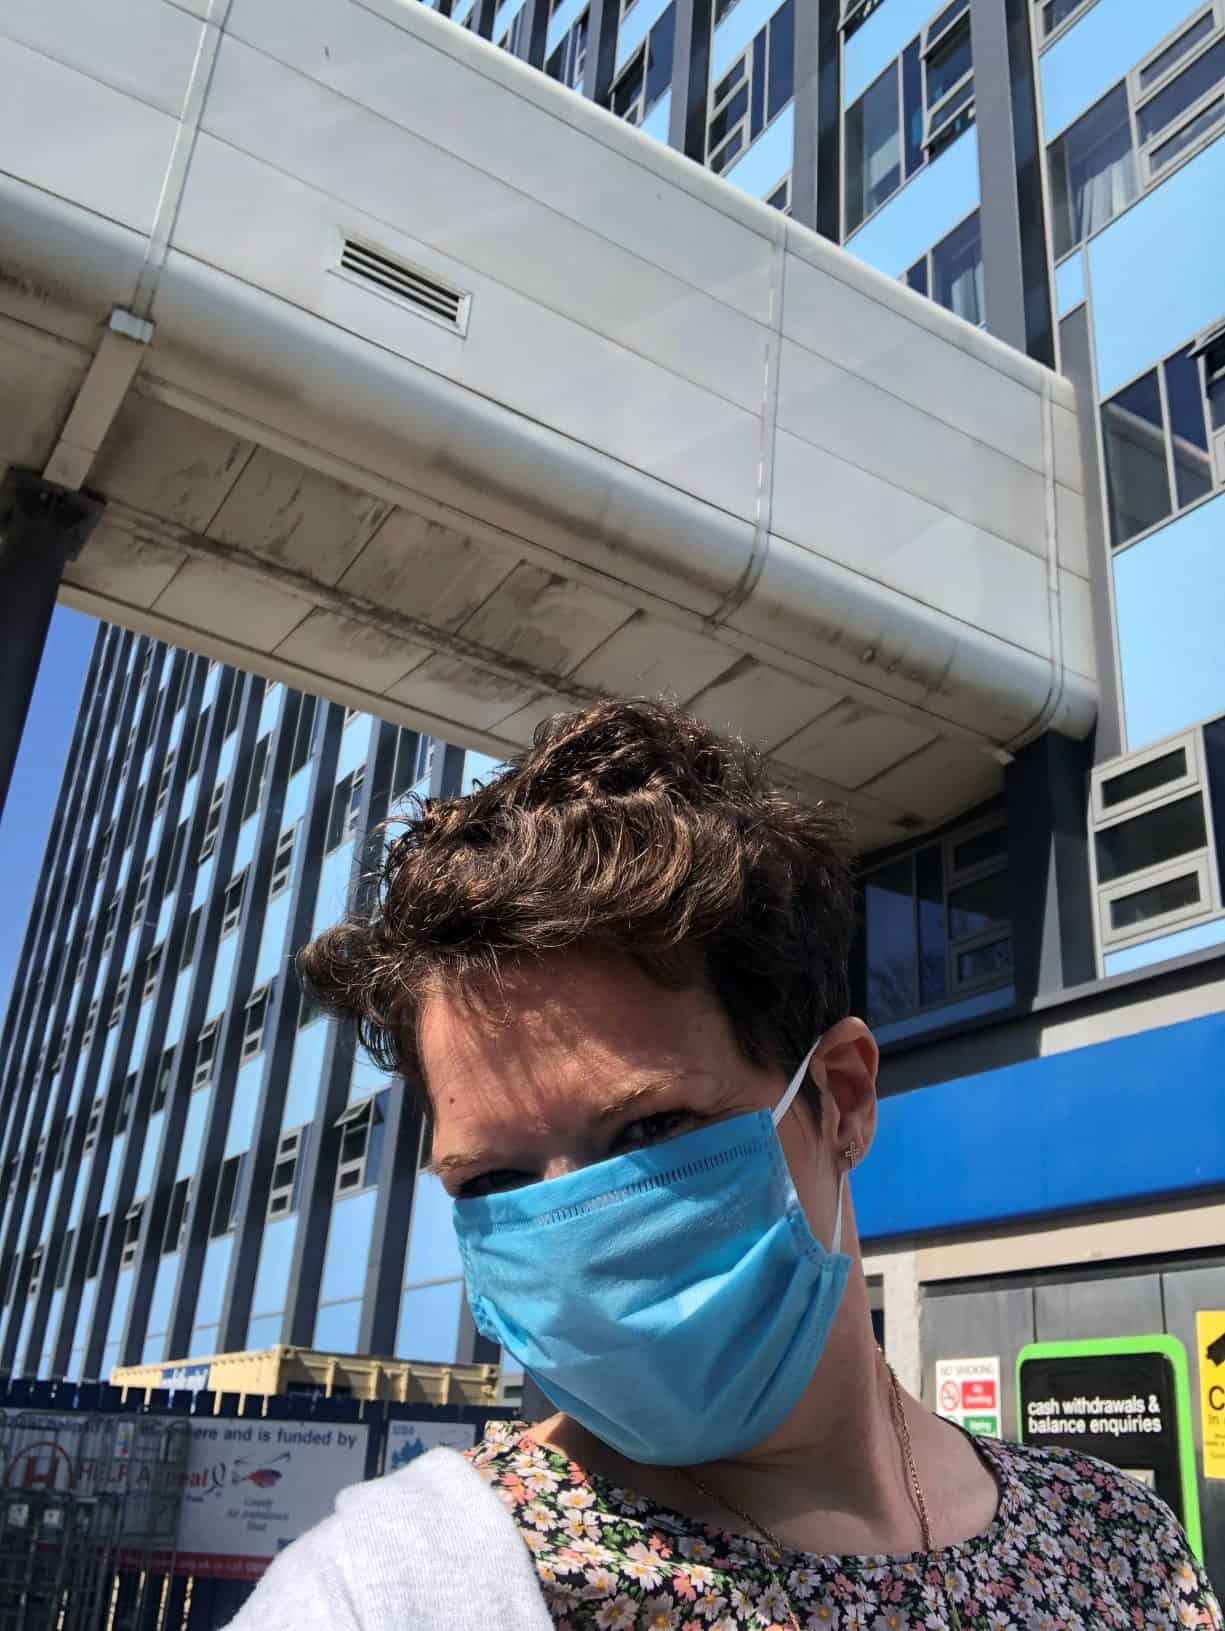 This photo is of Lizzie stood outside Hull University Teaching Hospitals Trust main tower block. There are windows surrounded by blue cladding and Lizzie is wearing a blue facemask, floral t-shirt and grey cardigan. She has short brown hair.